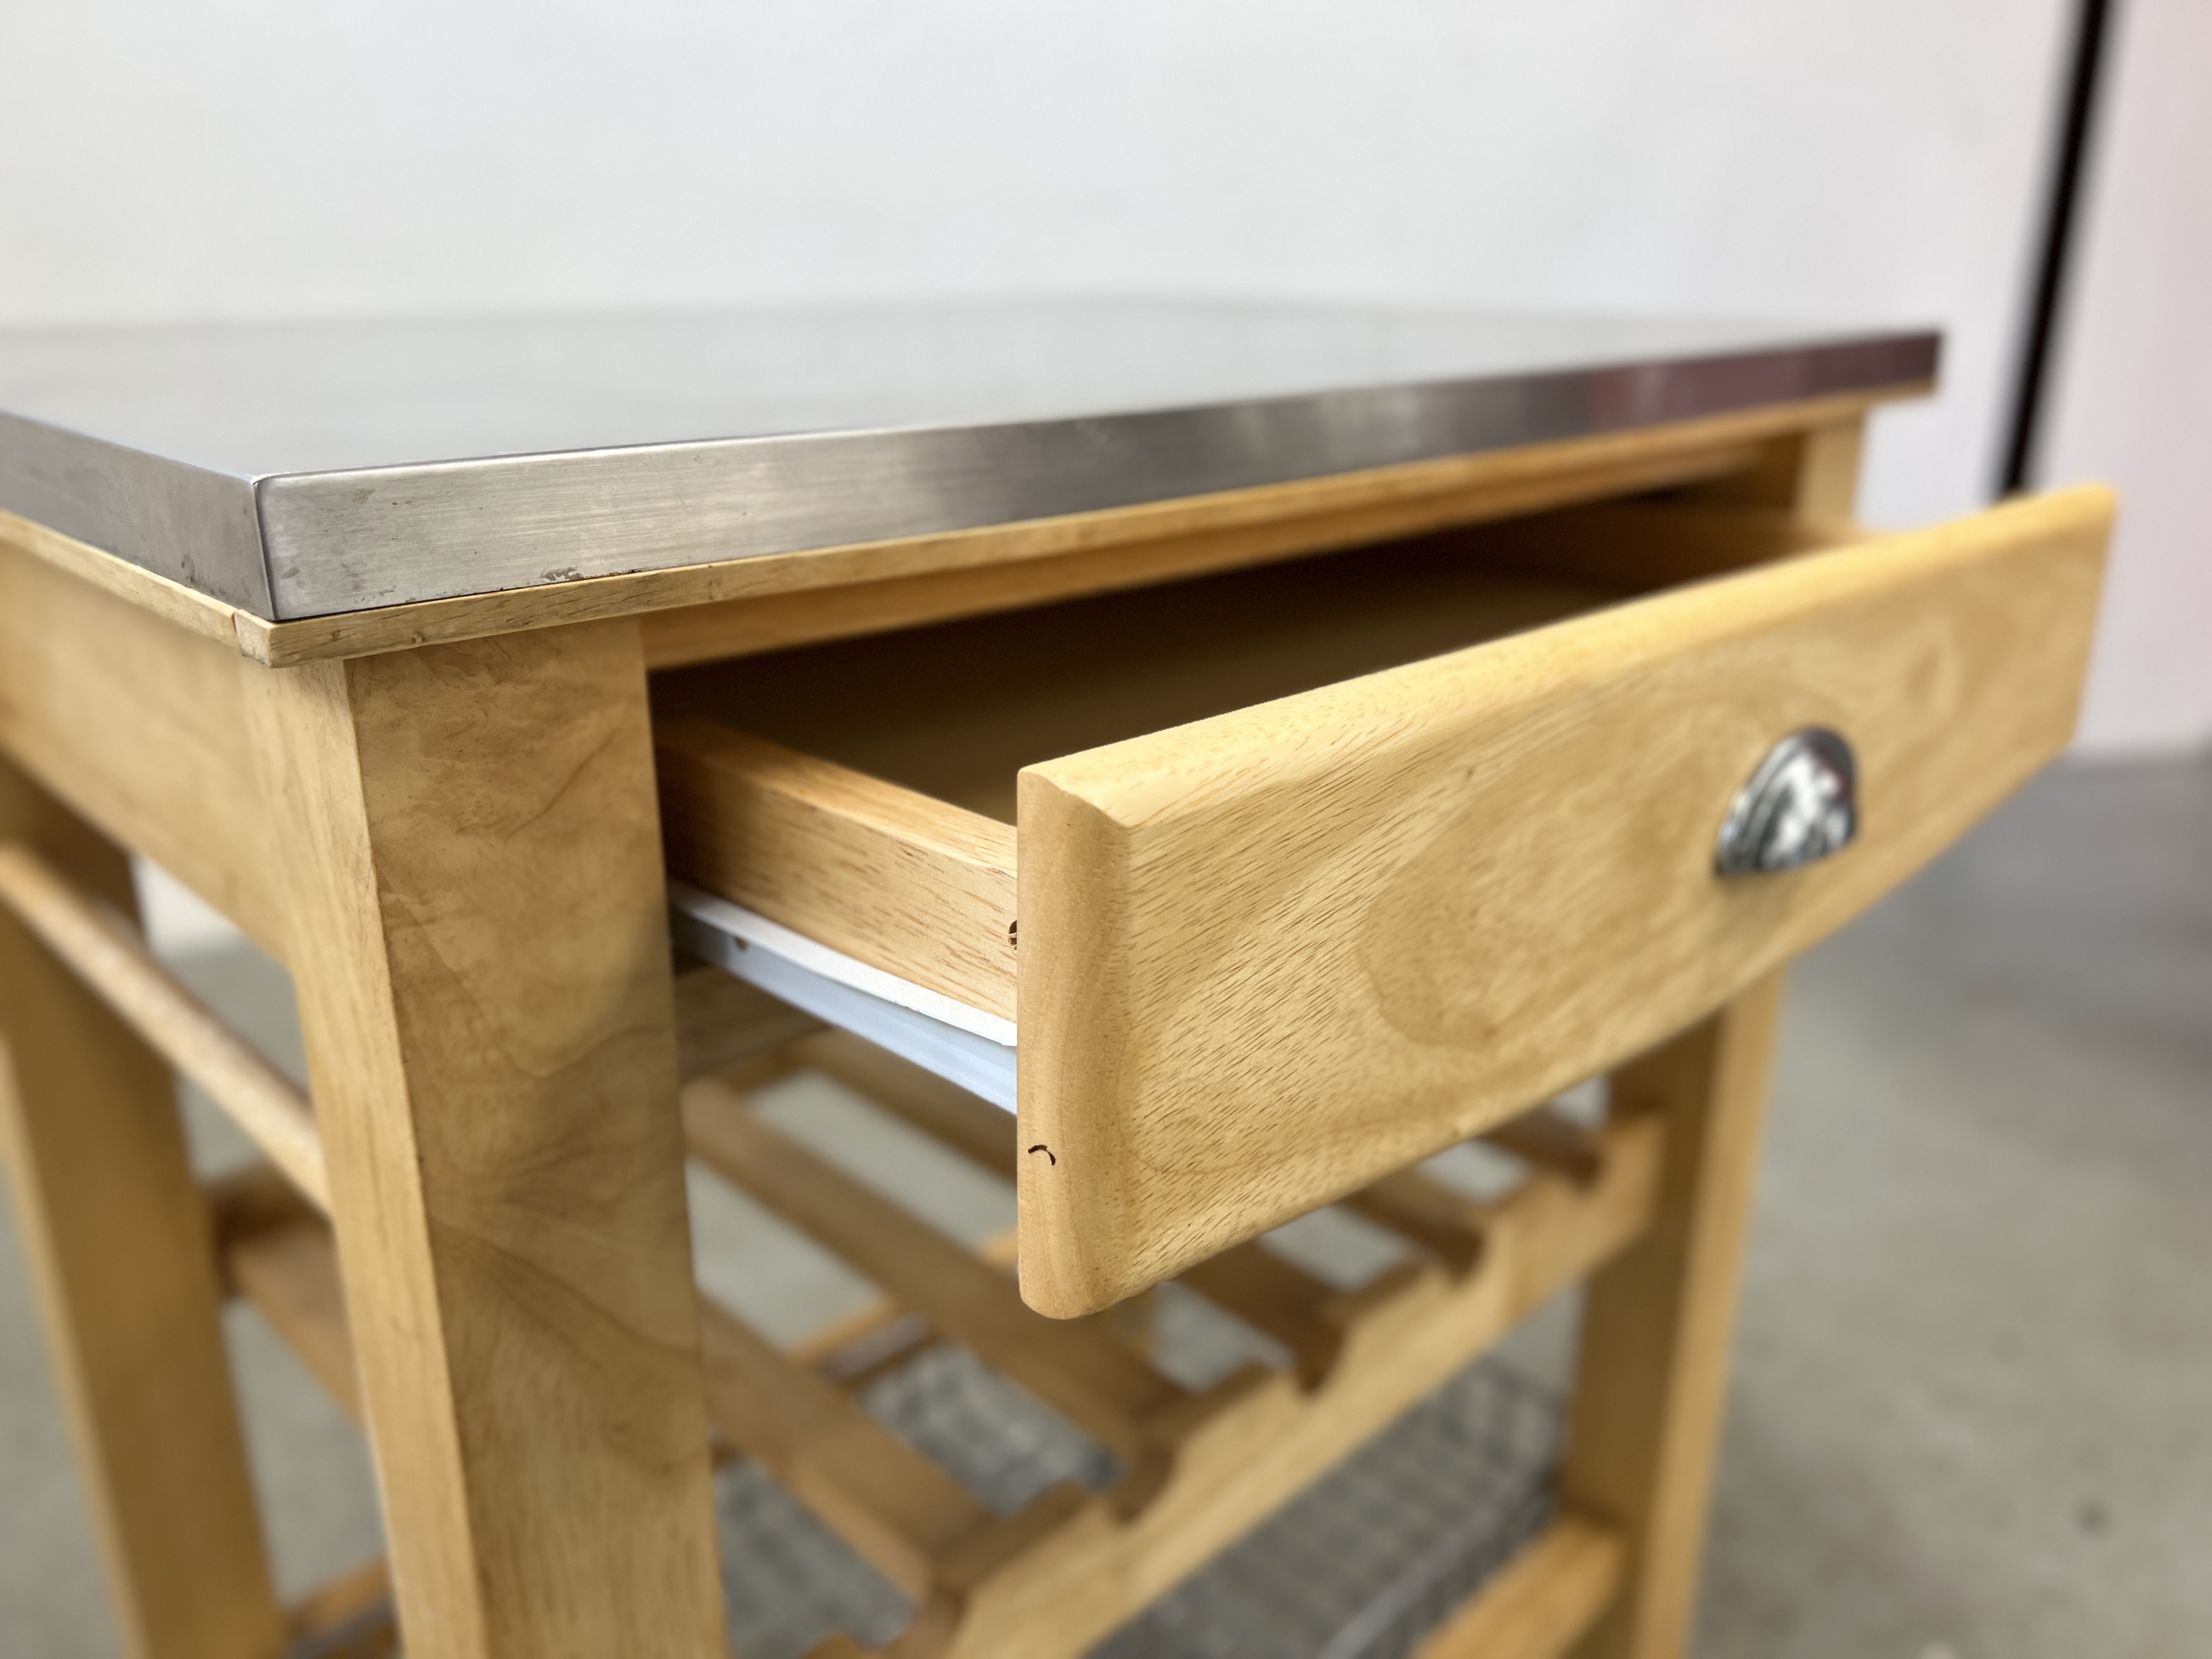 A SOLID BEECHWOOD CHEFS WORKSTATION WITH STAINLESS STEEL TOP WIDTH 70CM. DEPTH 50CM. - Image 7 of 9